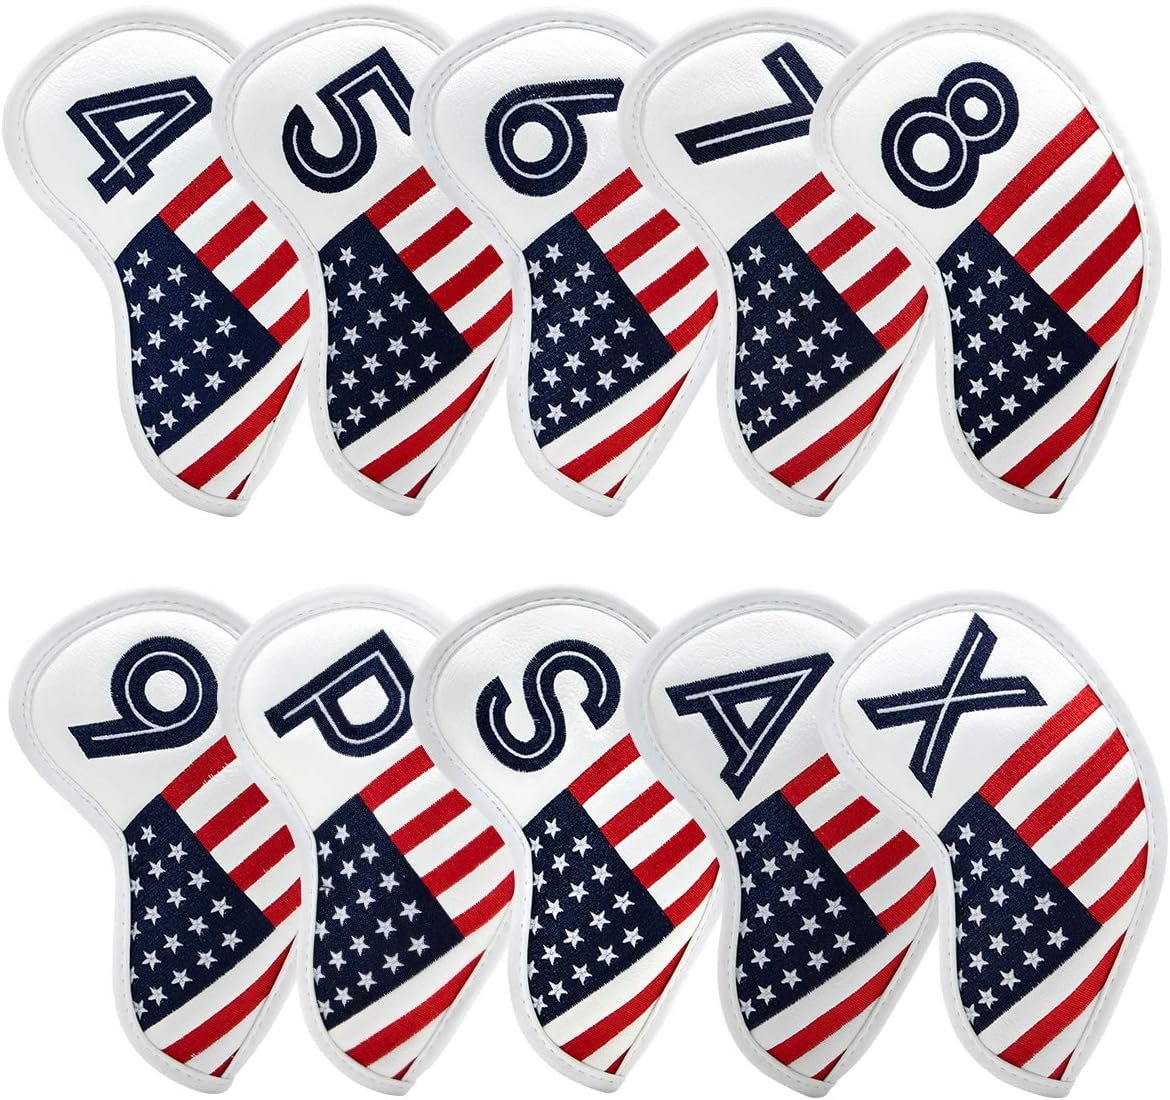 Golf Iron Head Covers Set Iron Headcover Wedge Cover Golf Iron Club Cover USA American Flag for PXG0311